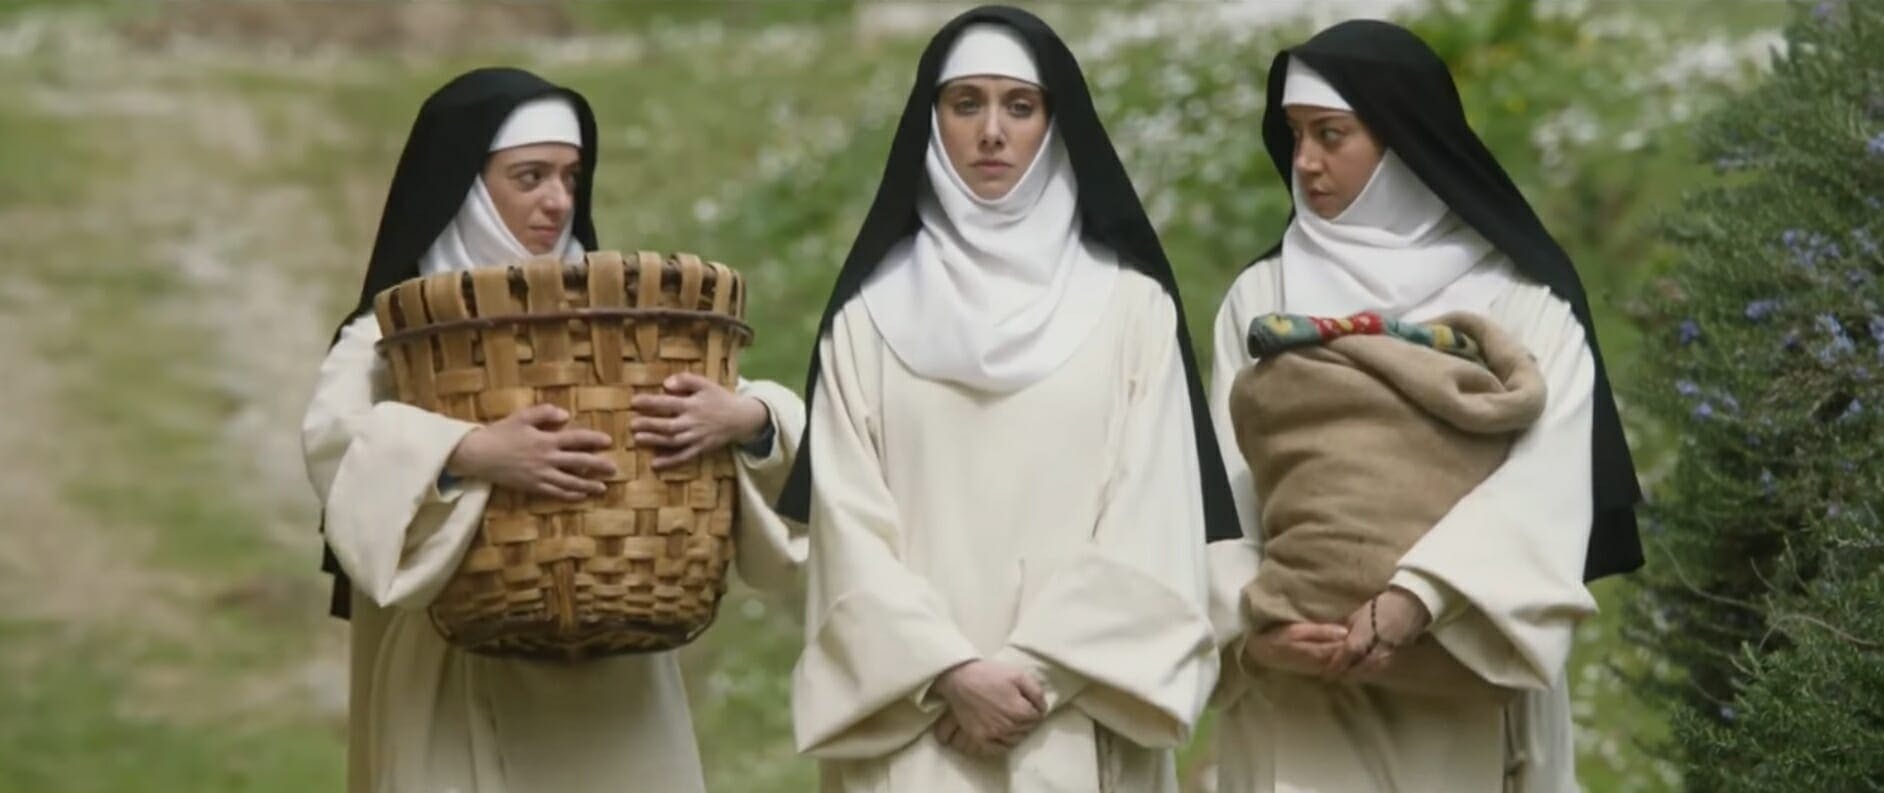 best comedy movies on amazon prime - the little hours